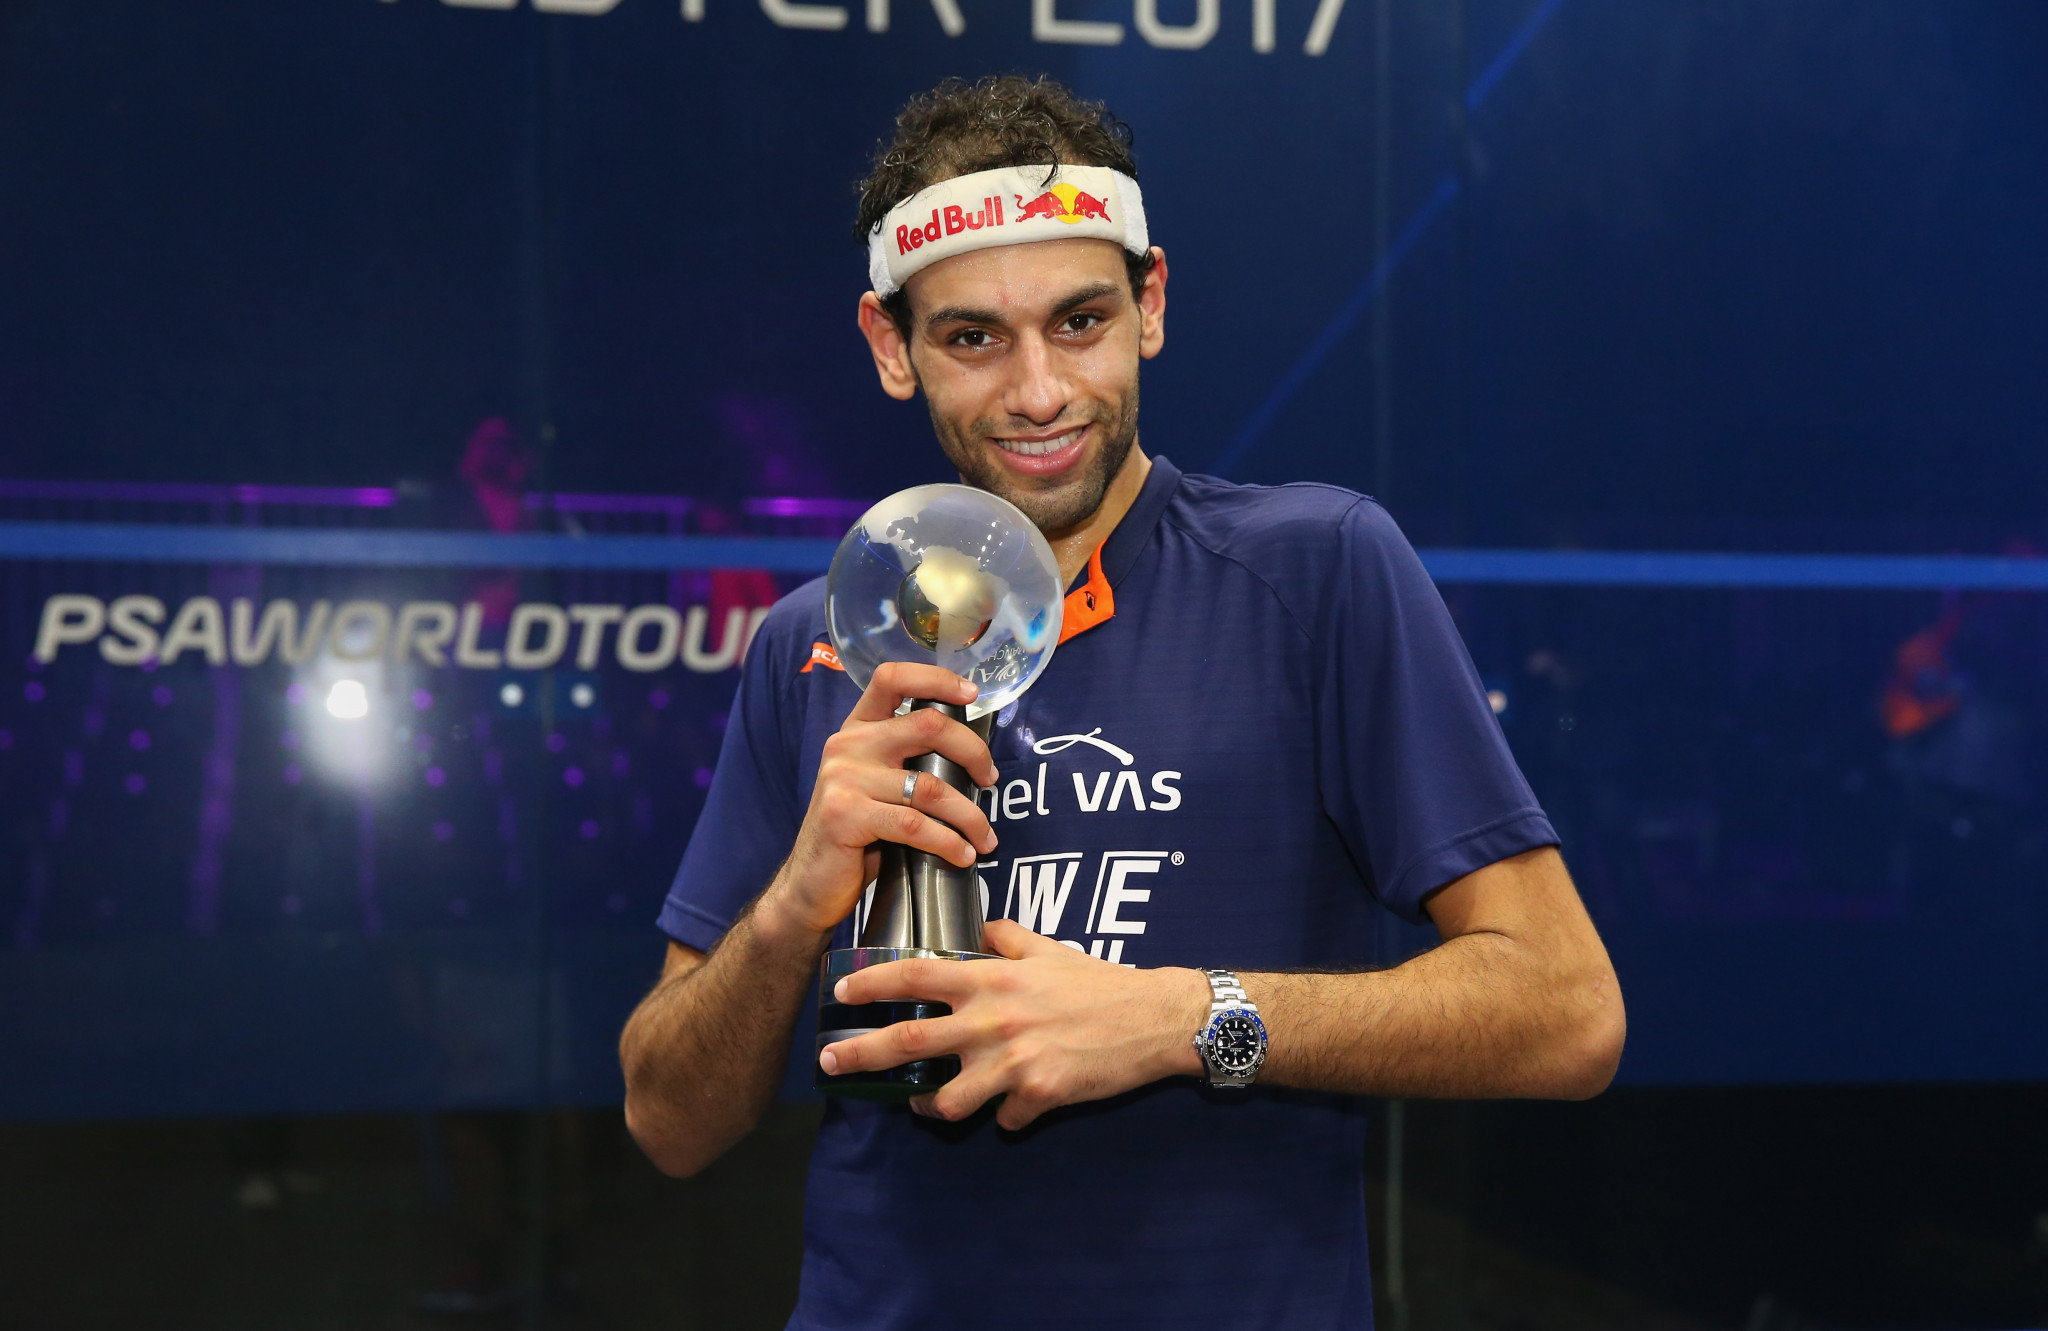 World number one Mohamed Elshorbagy could get his hands on another trophy this week ©Getty Images